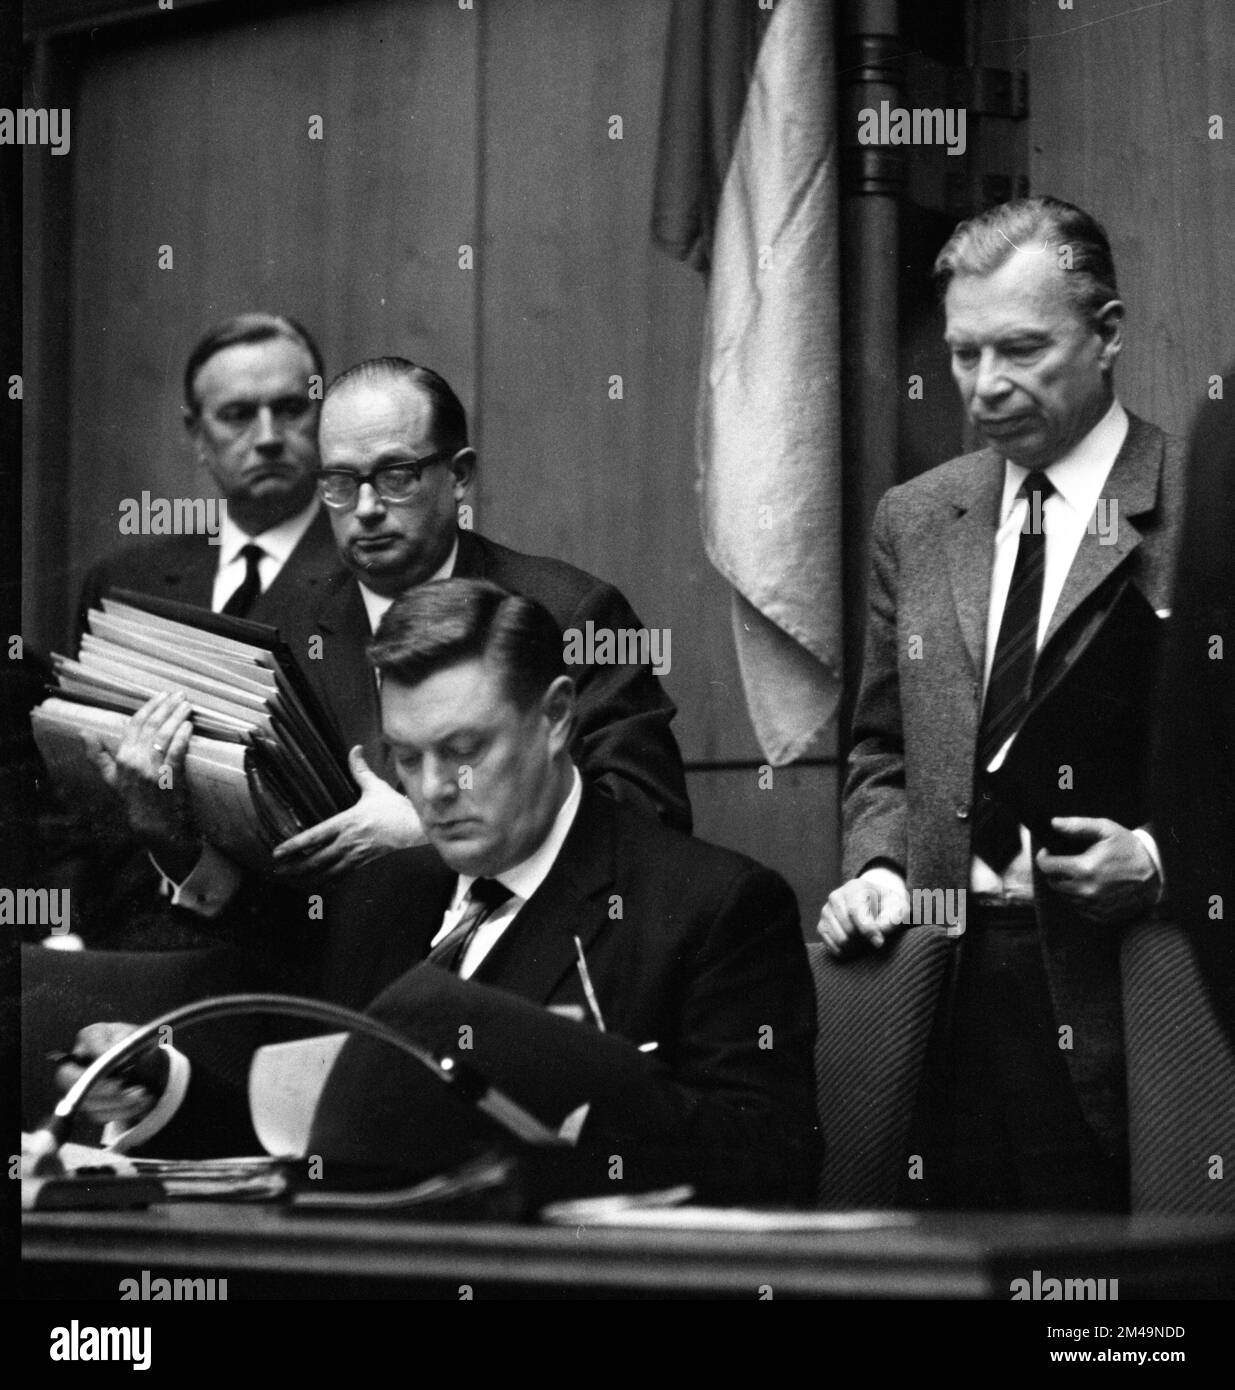 Session of the North Rhine-Westphalian Landtag in 1965 in Duesseldorf. Werner Figgen (FDP) in front, Germany Stock Photo